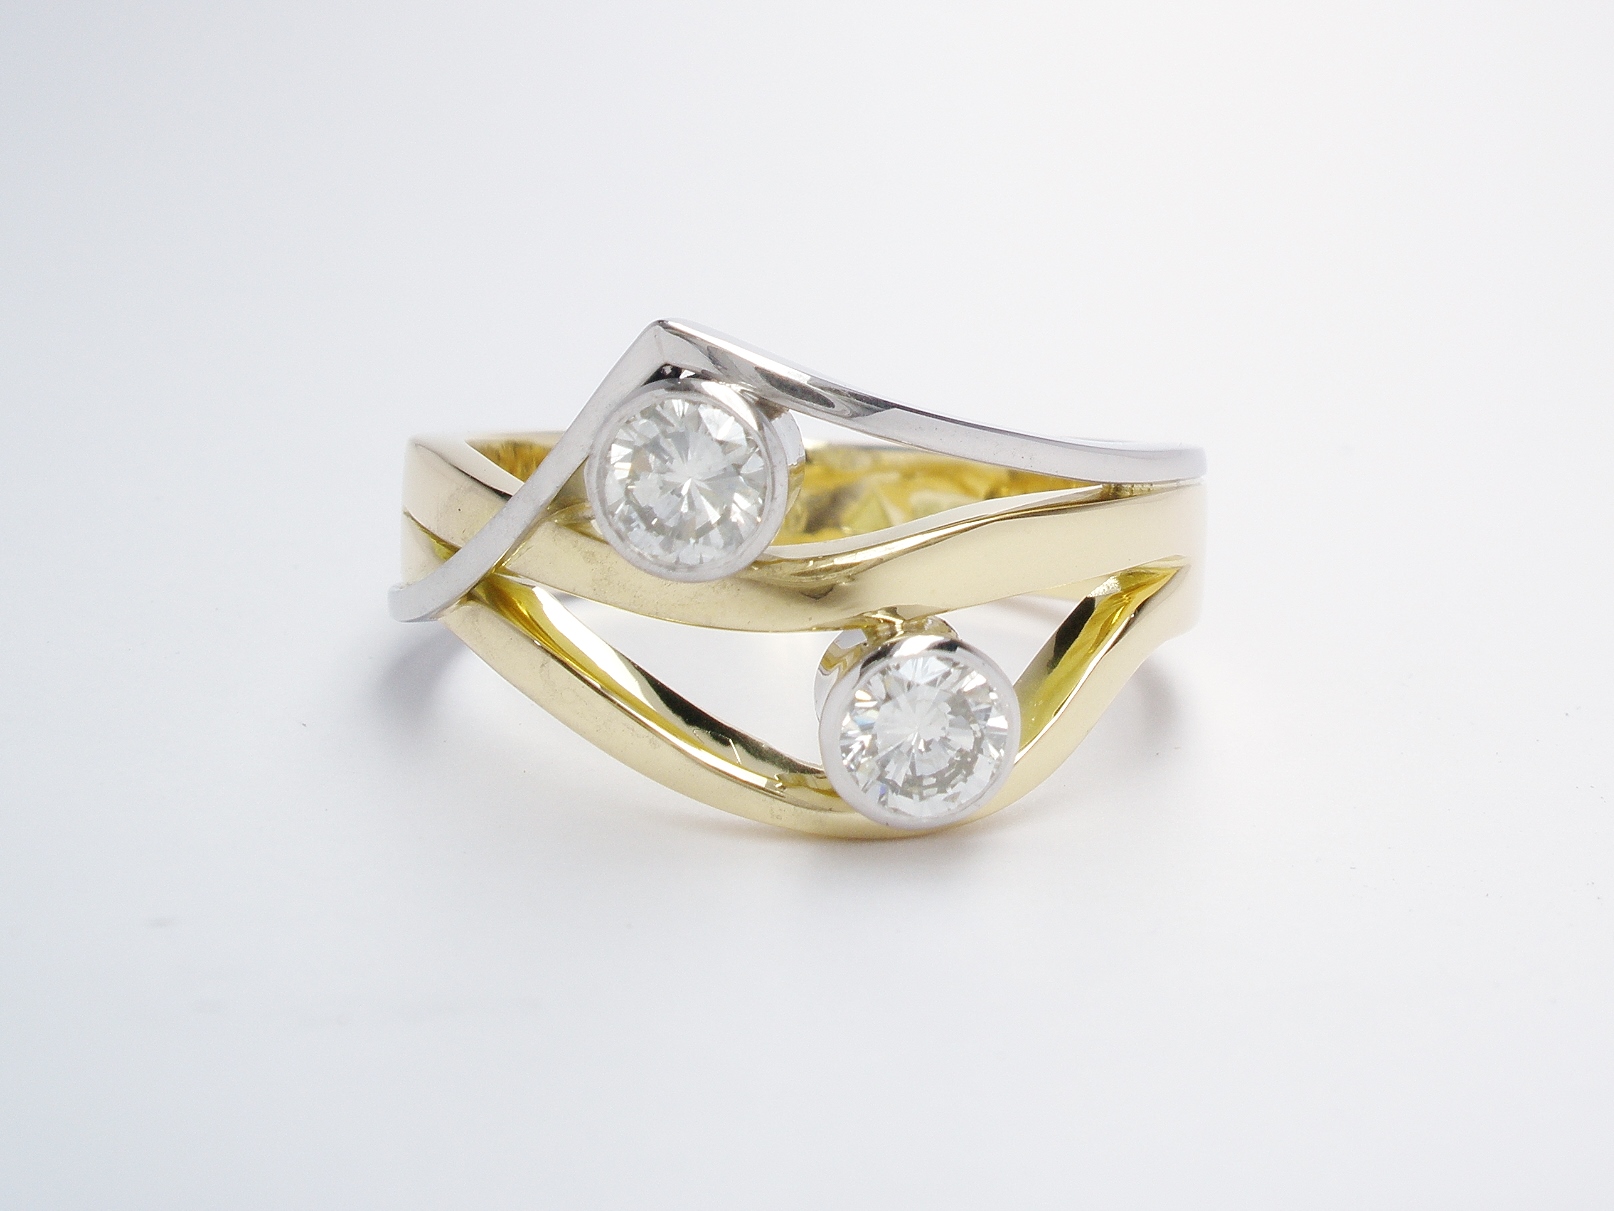 A 2 stone rub-over set round brilliant cut diamond wave & wishbone style ring mounted in 18ct. yellow gold and platinum.